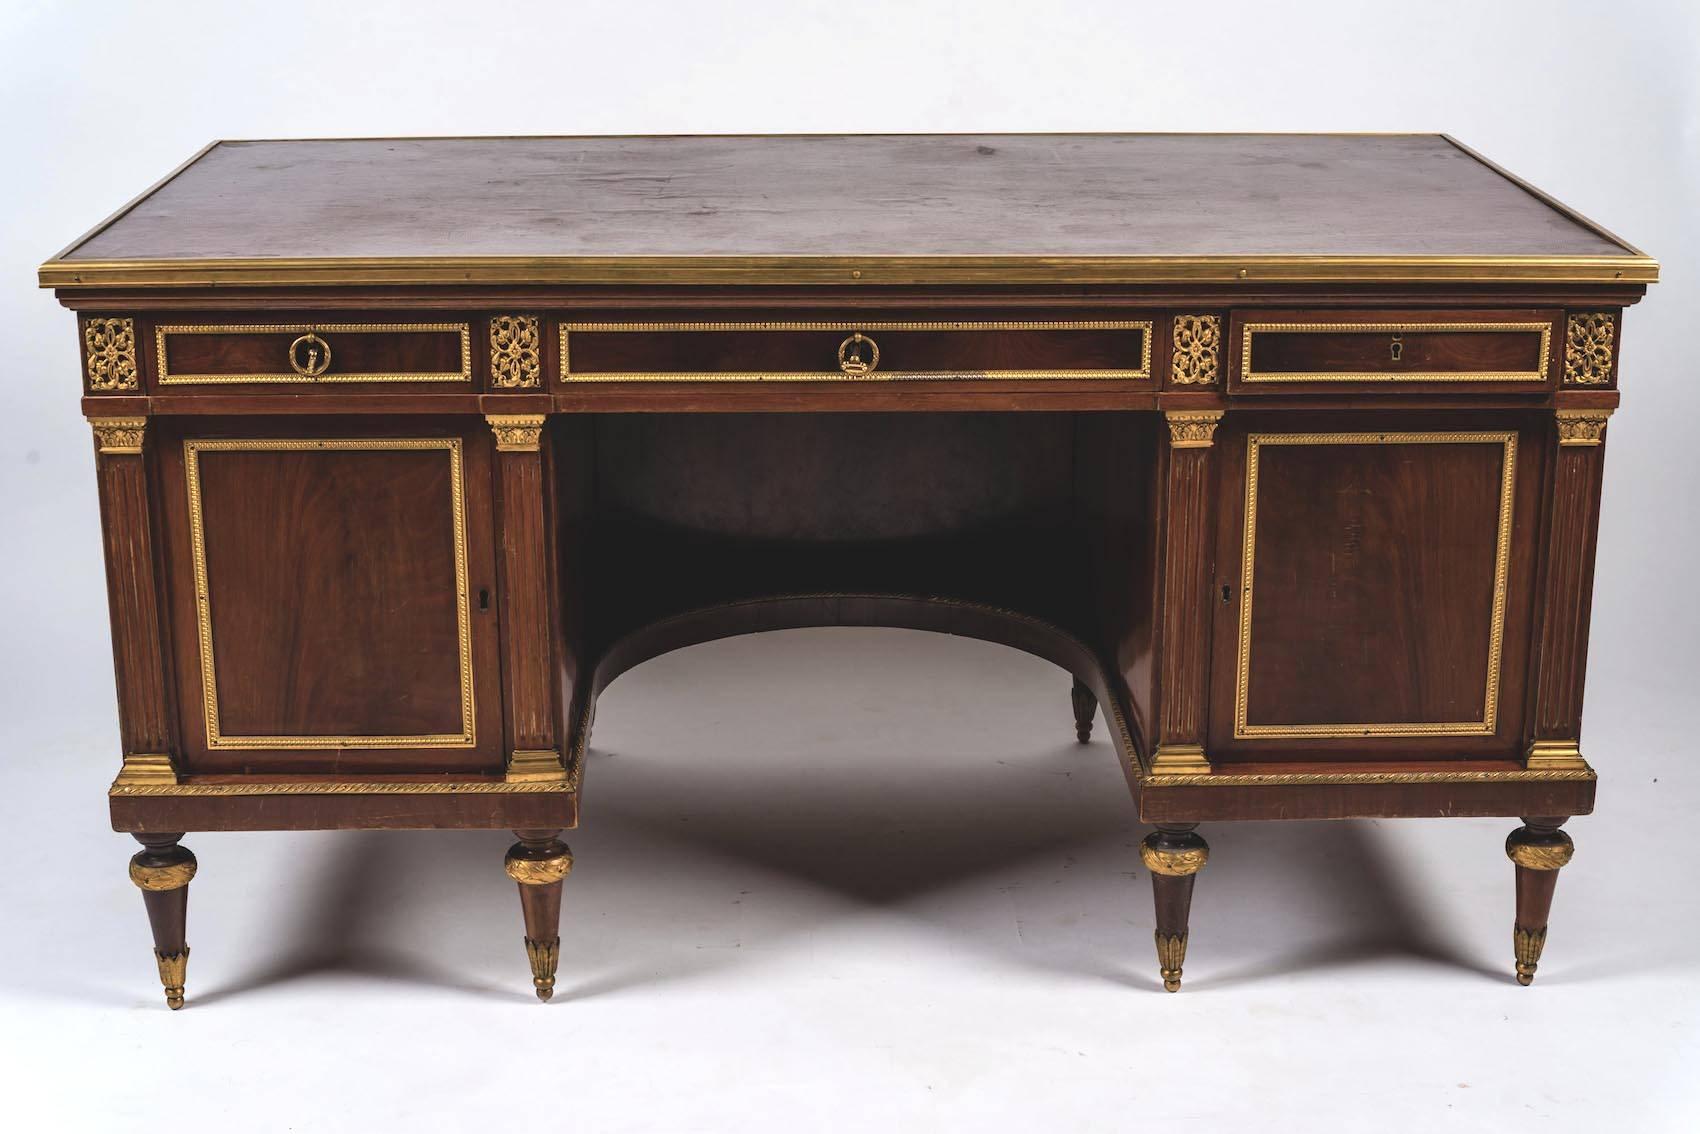 A fine French 18th century mahogany pedestal desk mounts with gilded bronze. Both sides of the desk have small brass knobs that allow wings to be pulled out to extend the writing surface.
Measures: cm 79 x 151 x 82.